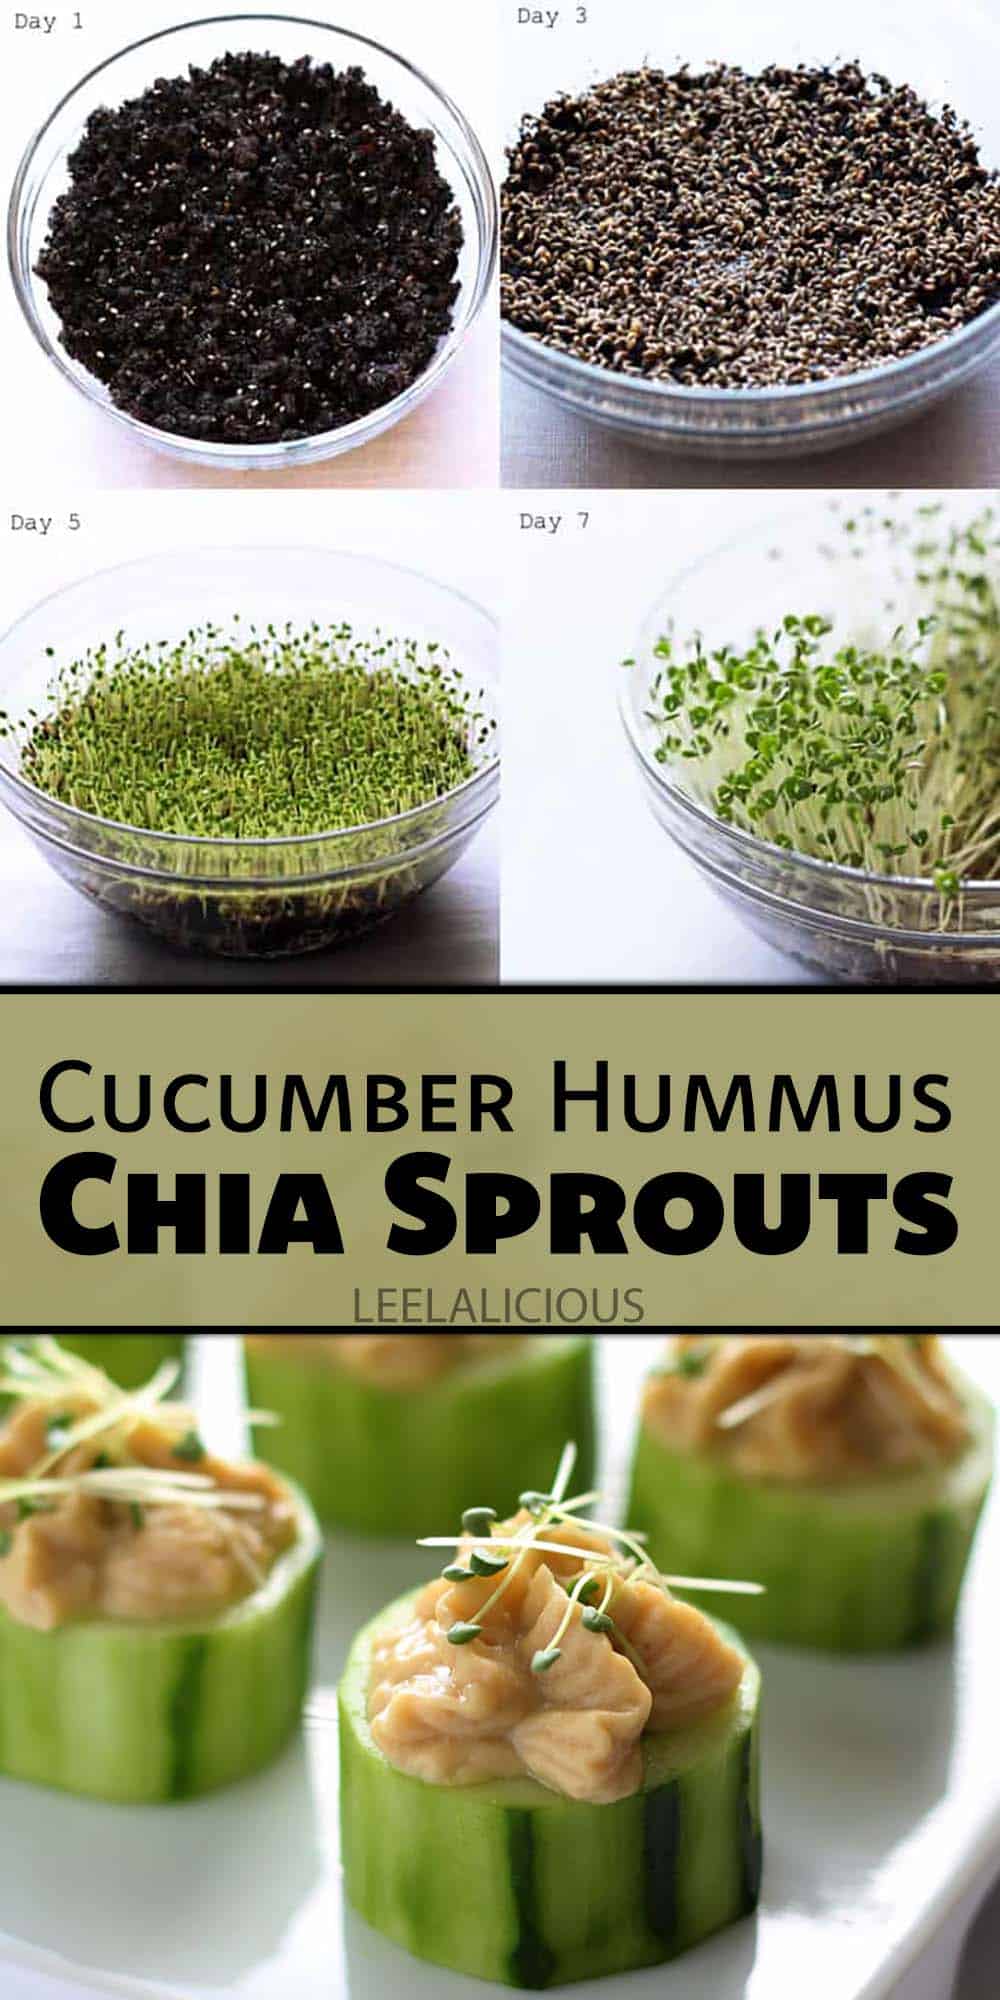 Cucumber Hummus Bites with Chia Sprouts